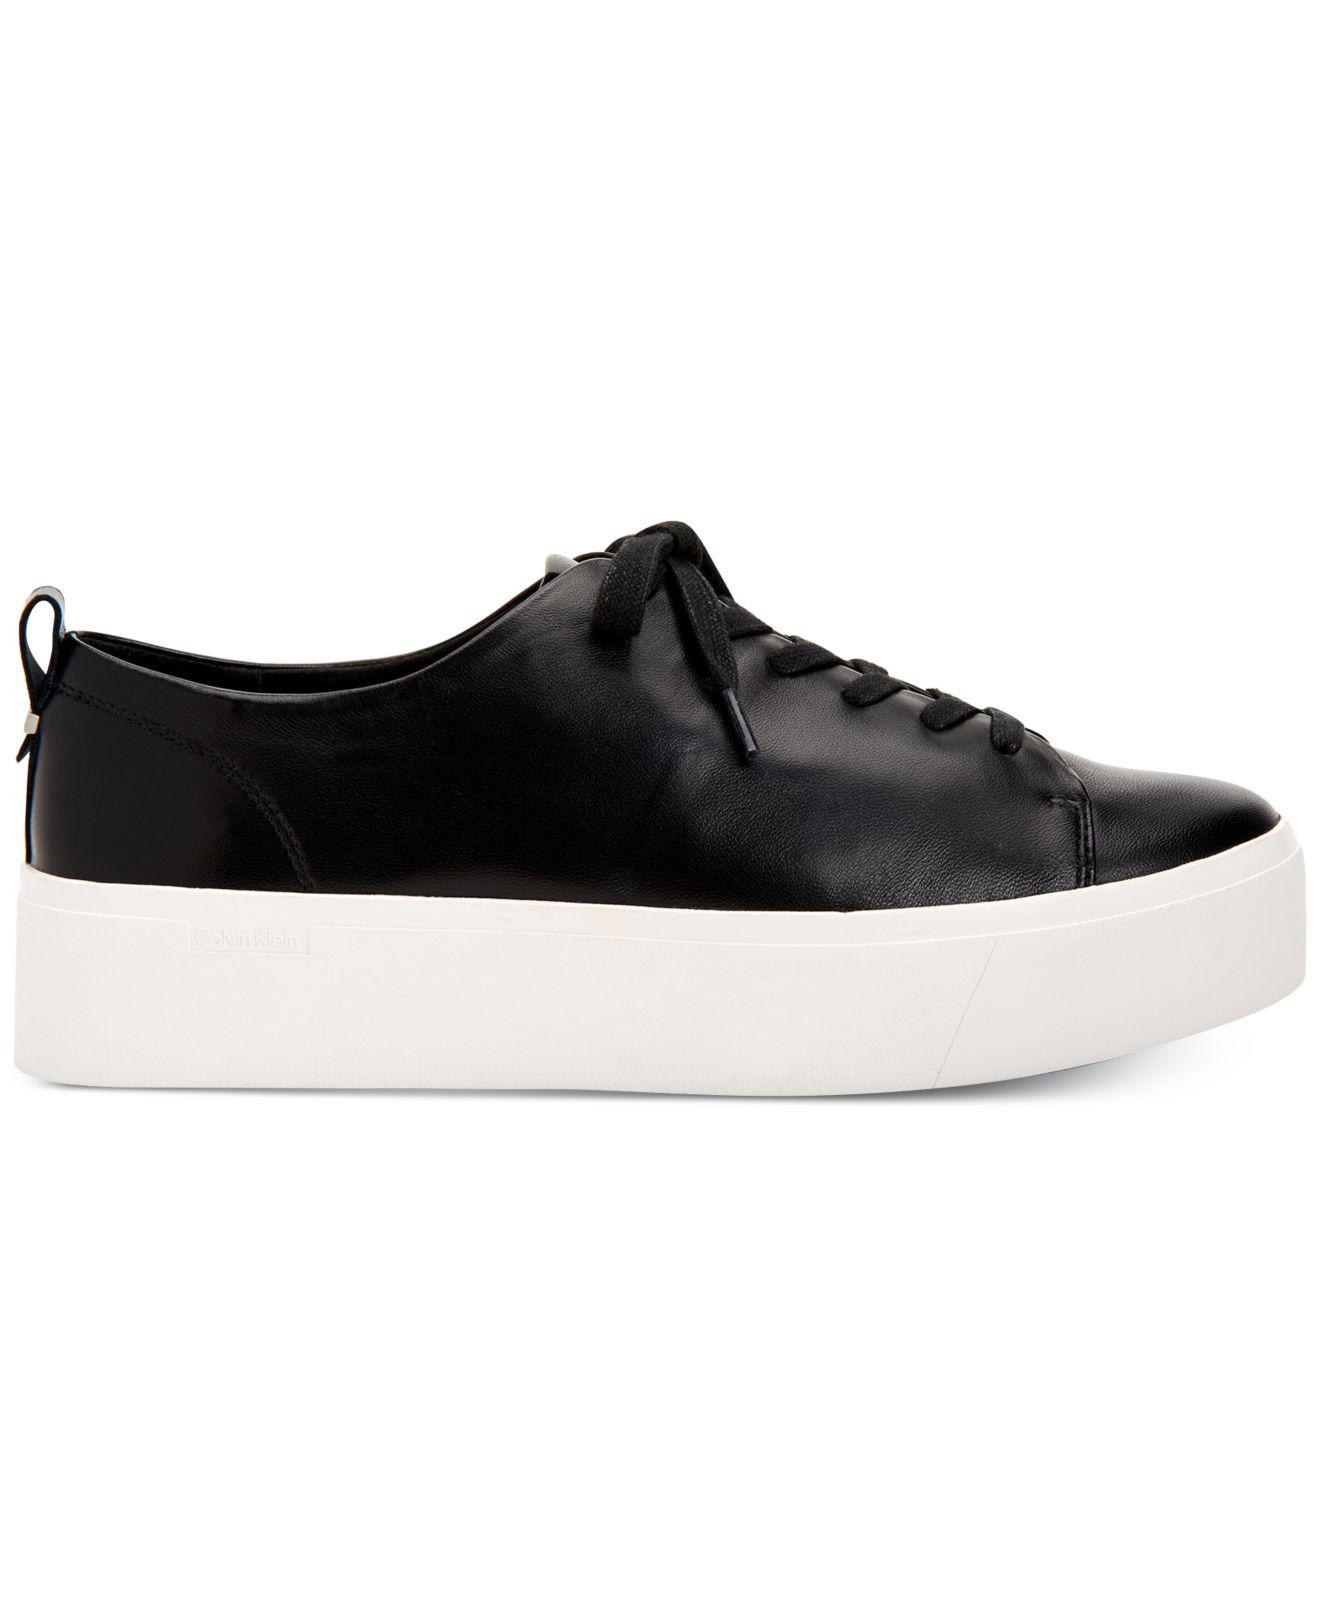 Calvin Klein Janet Sneakers Top Sellers, GET 58% OFF, dh-o.com